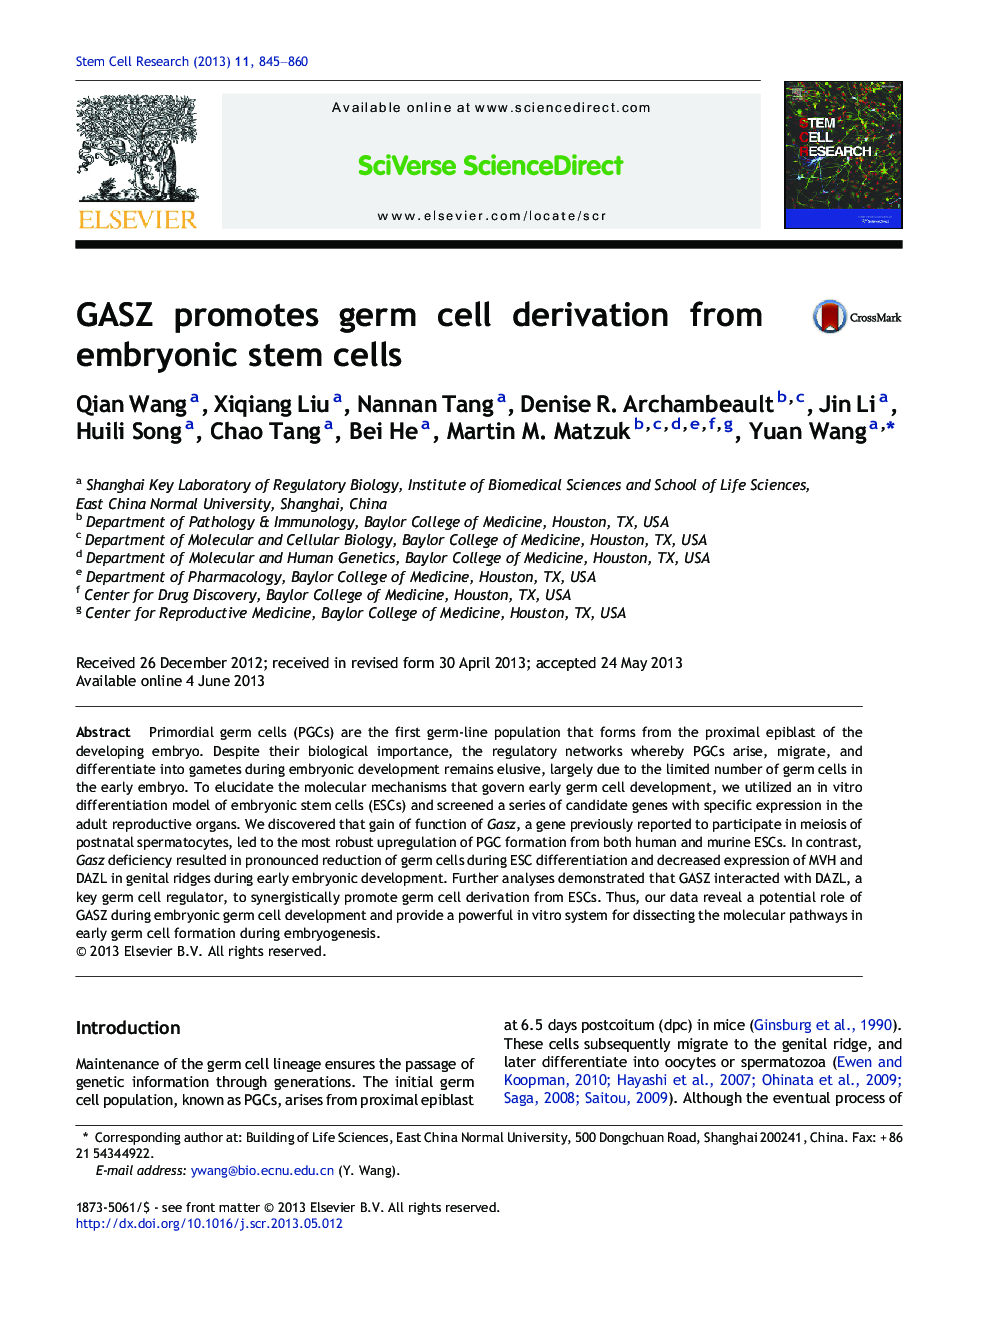 GASZ promotes germ cell derivation from embryonic stem cells